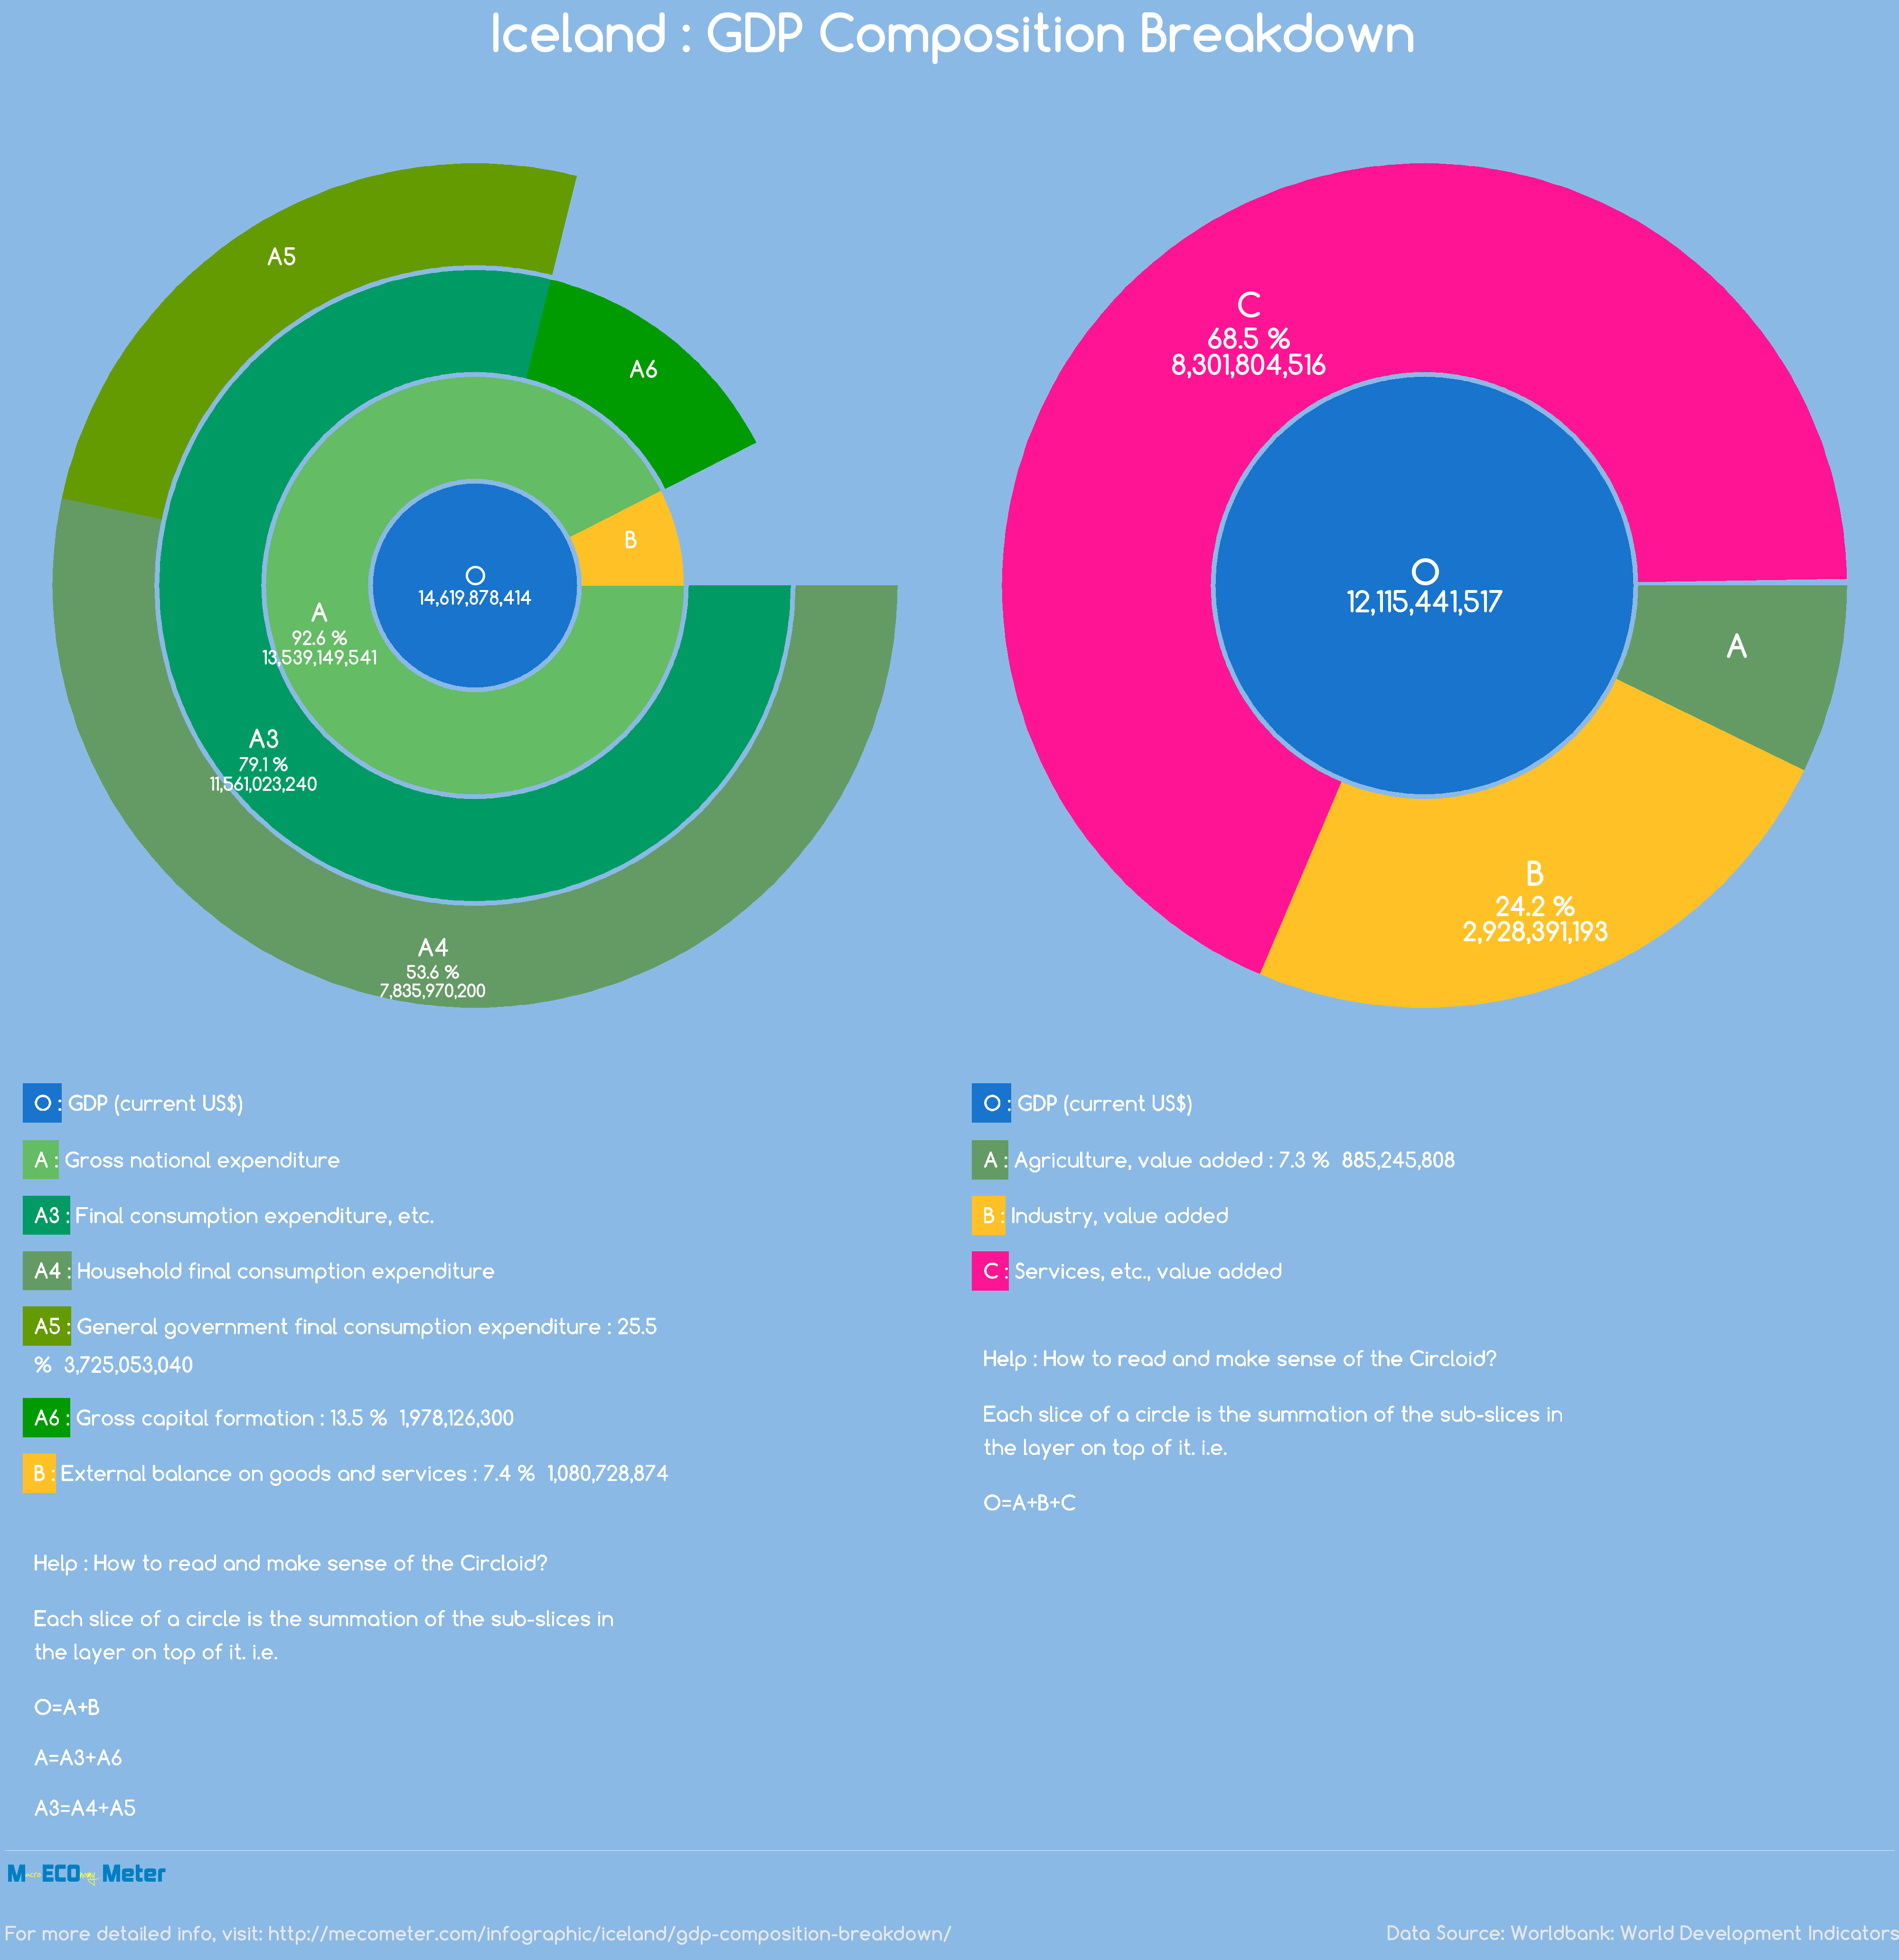 Iceland : GDP Composition Breakdown